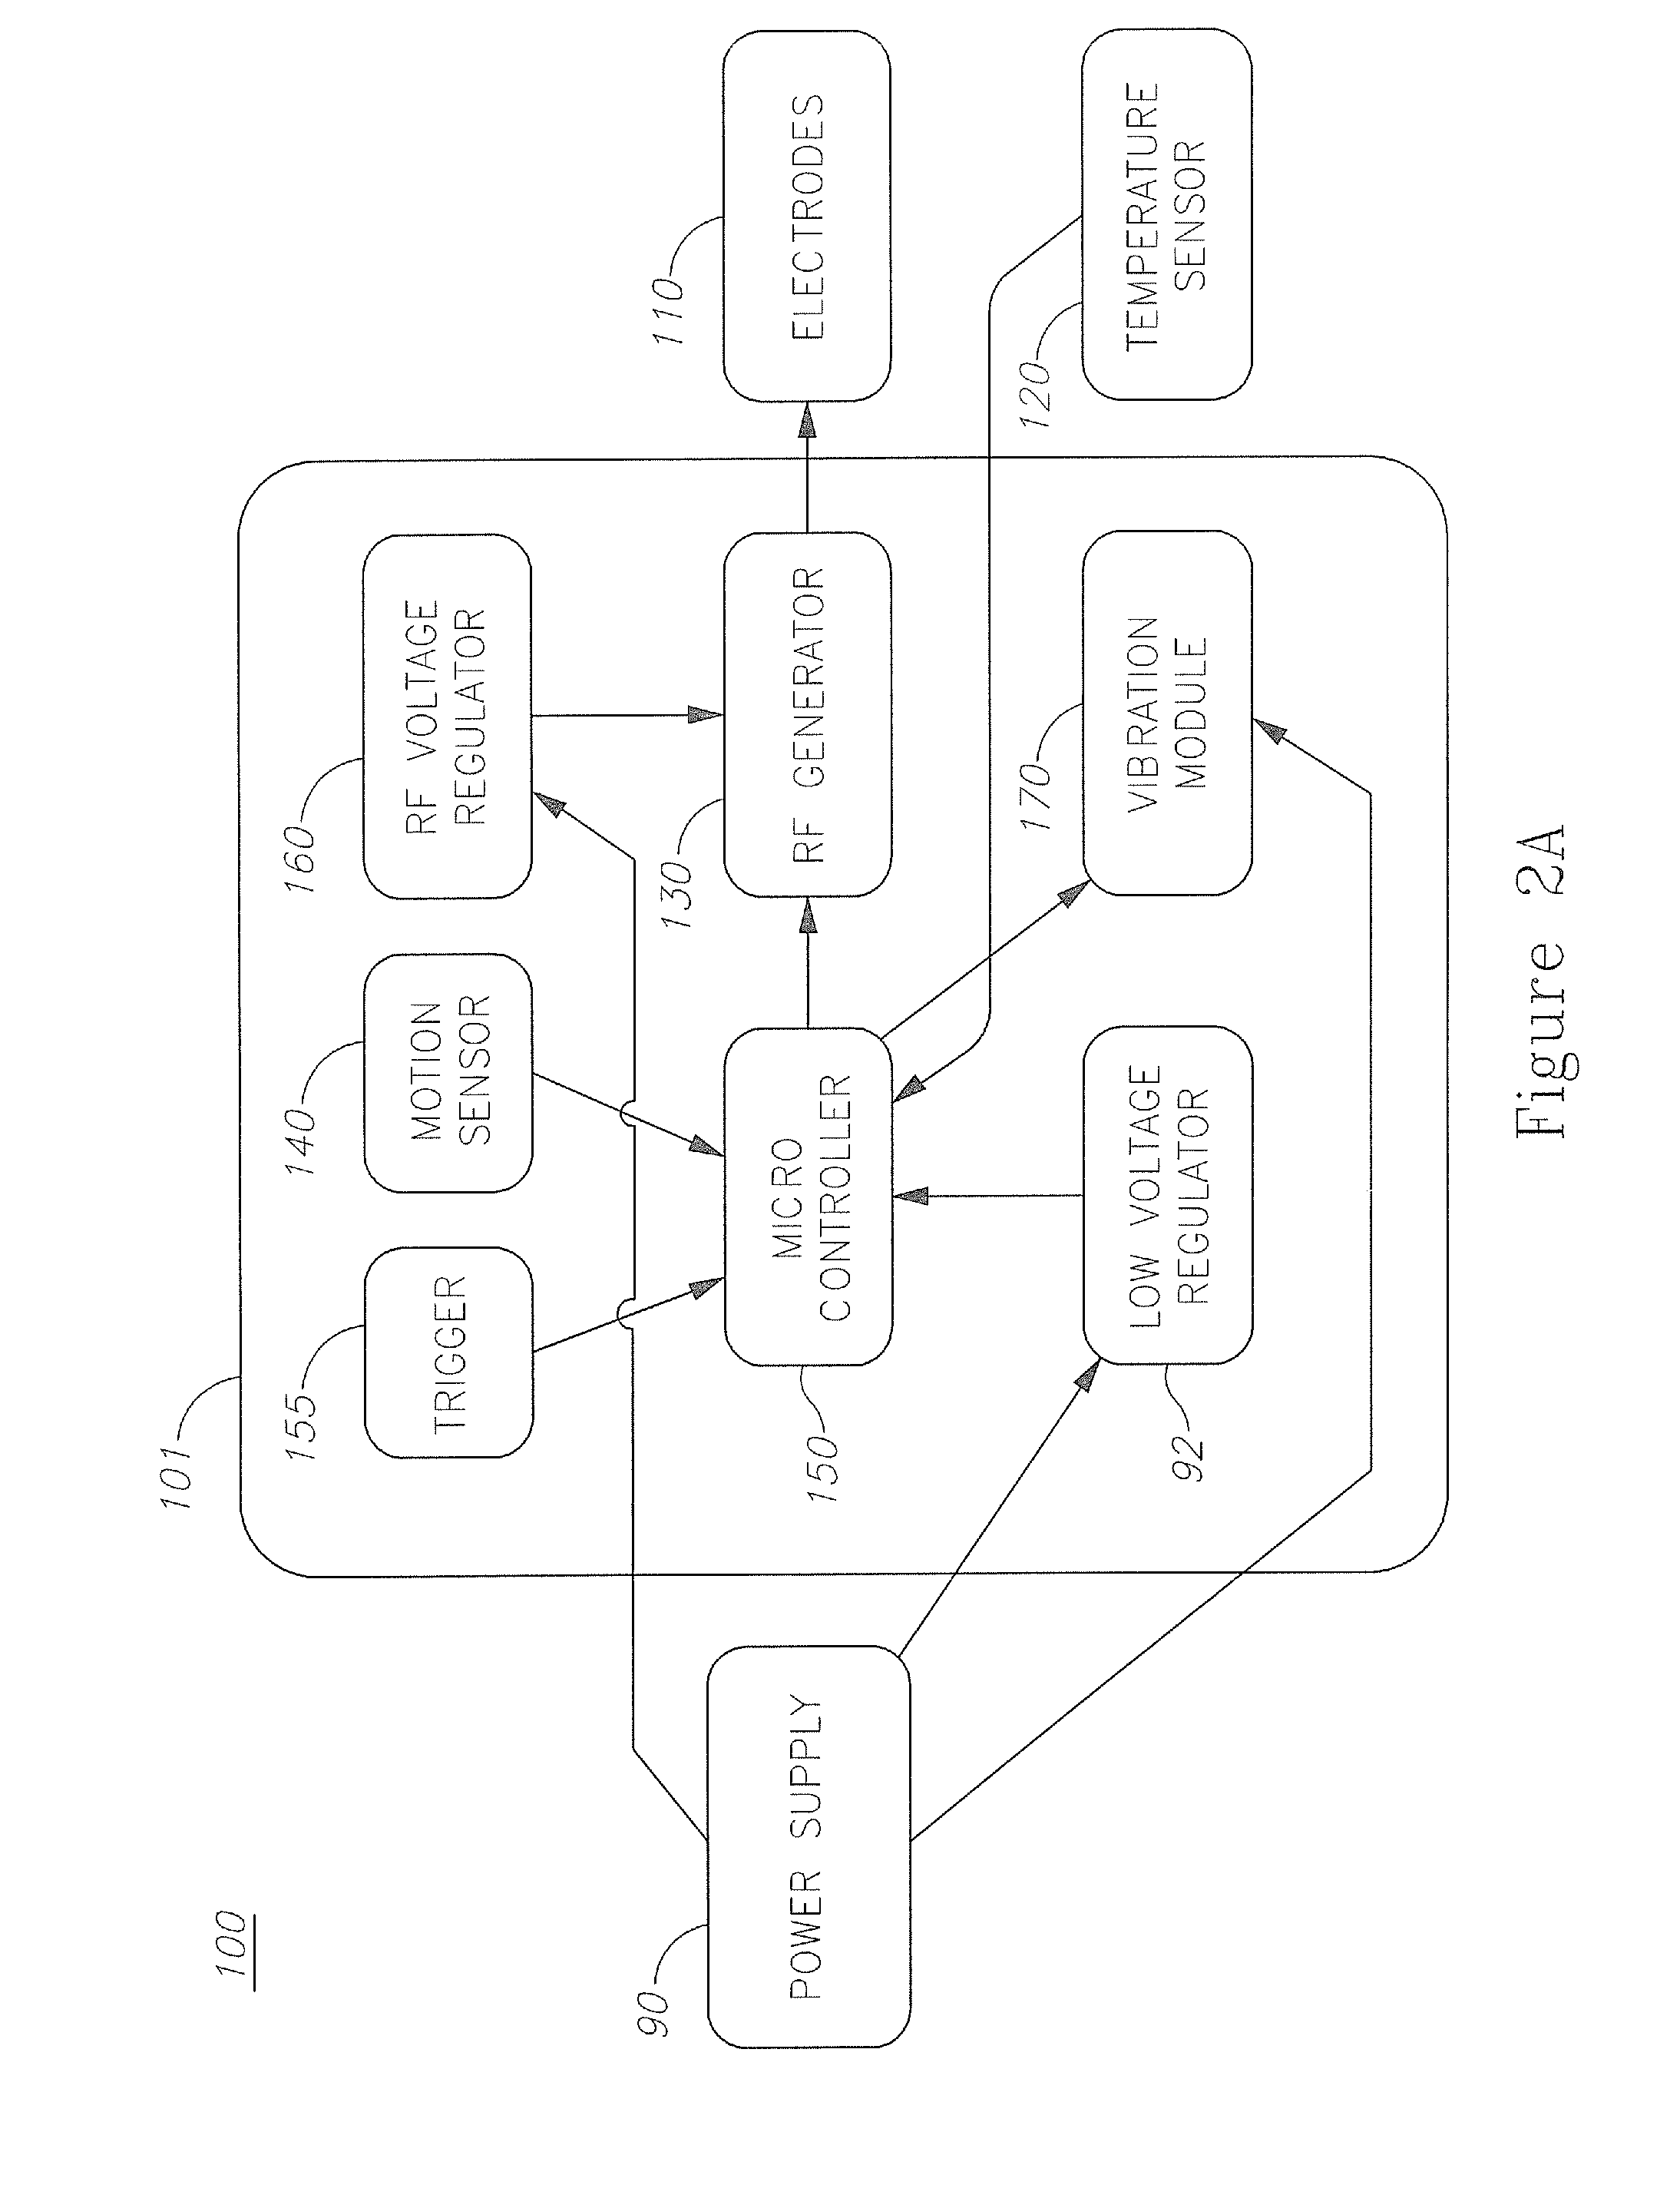 Skin treatment devices and methods